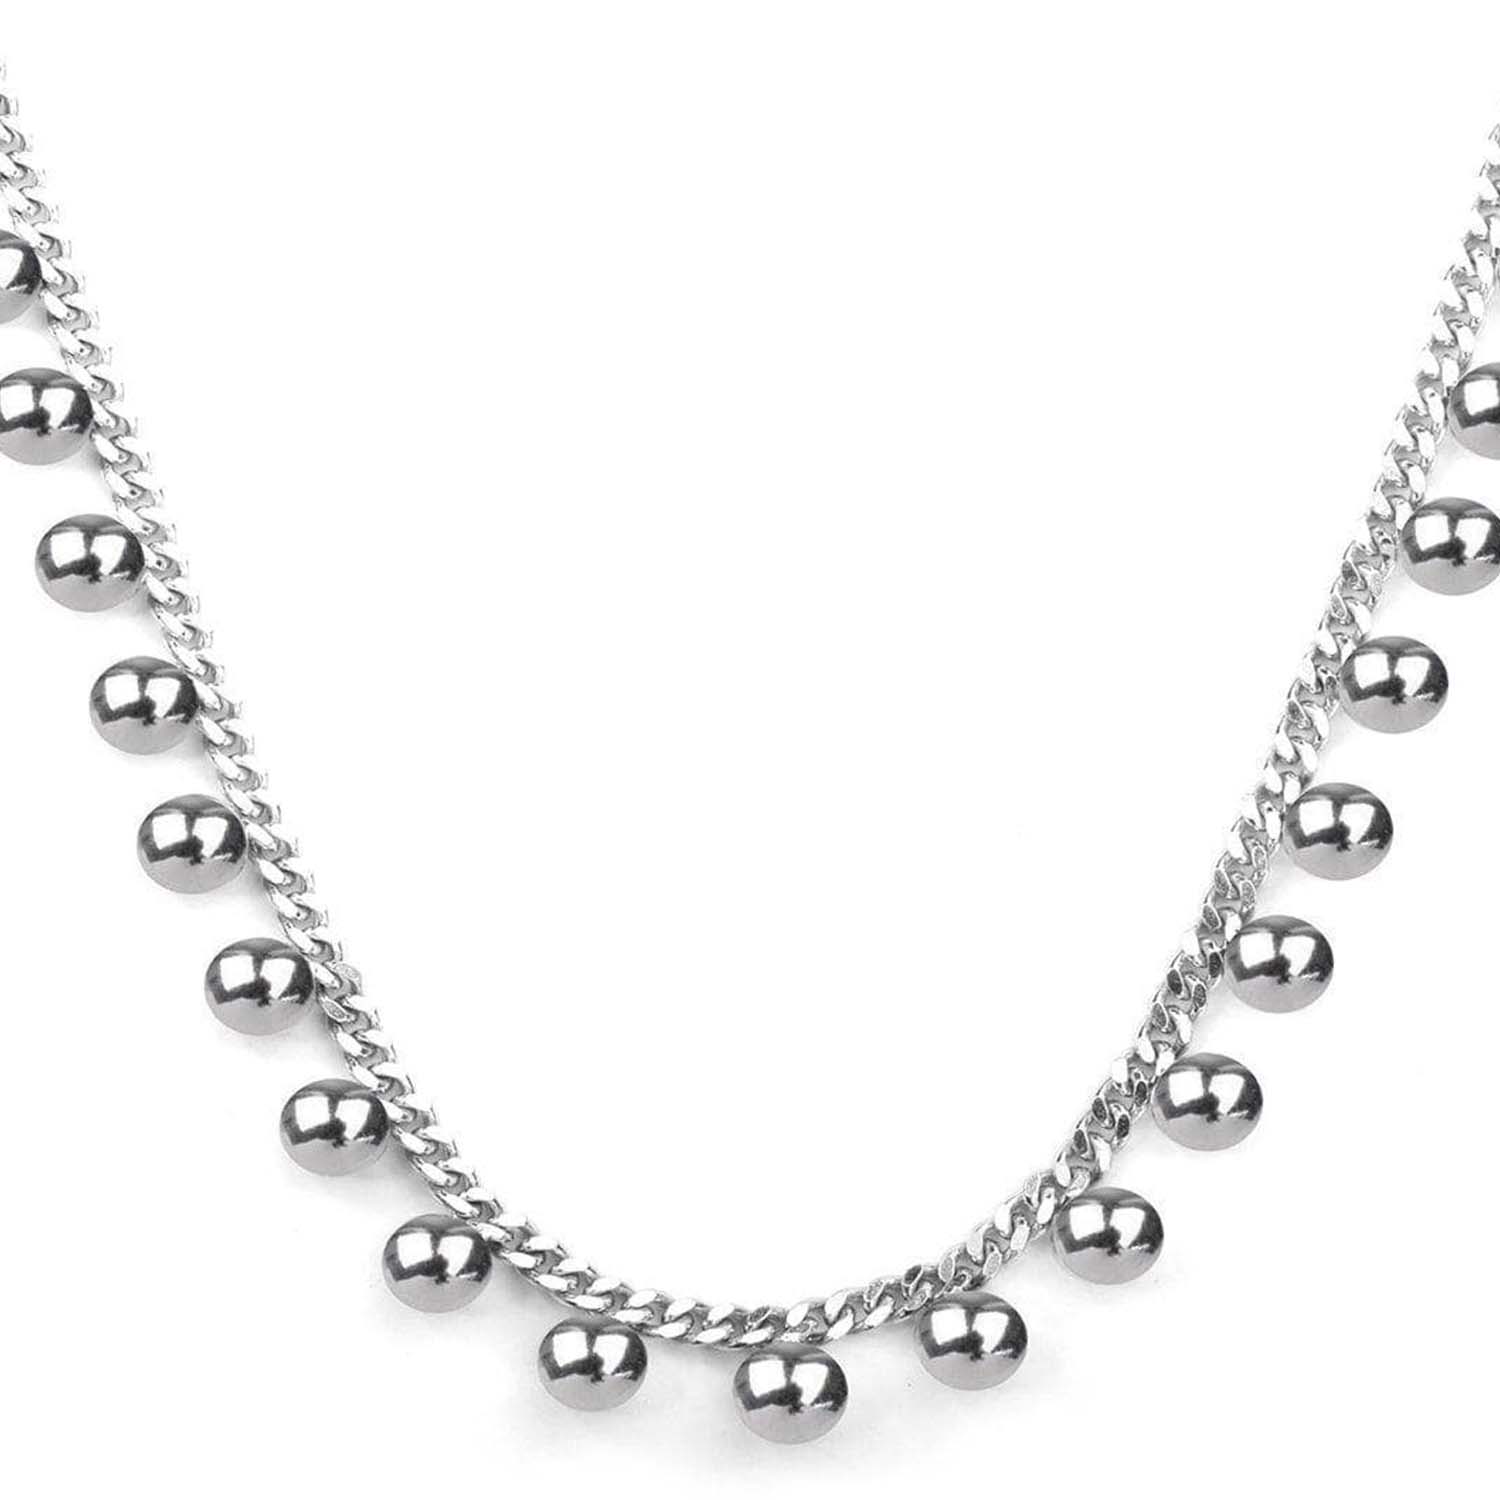 Charismatic Balls Silver 925 Silver Necklace